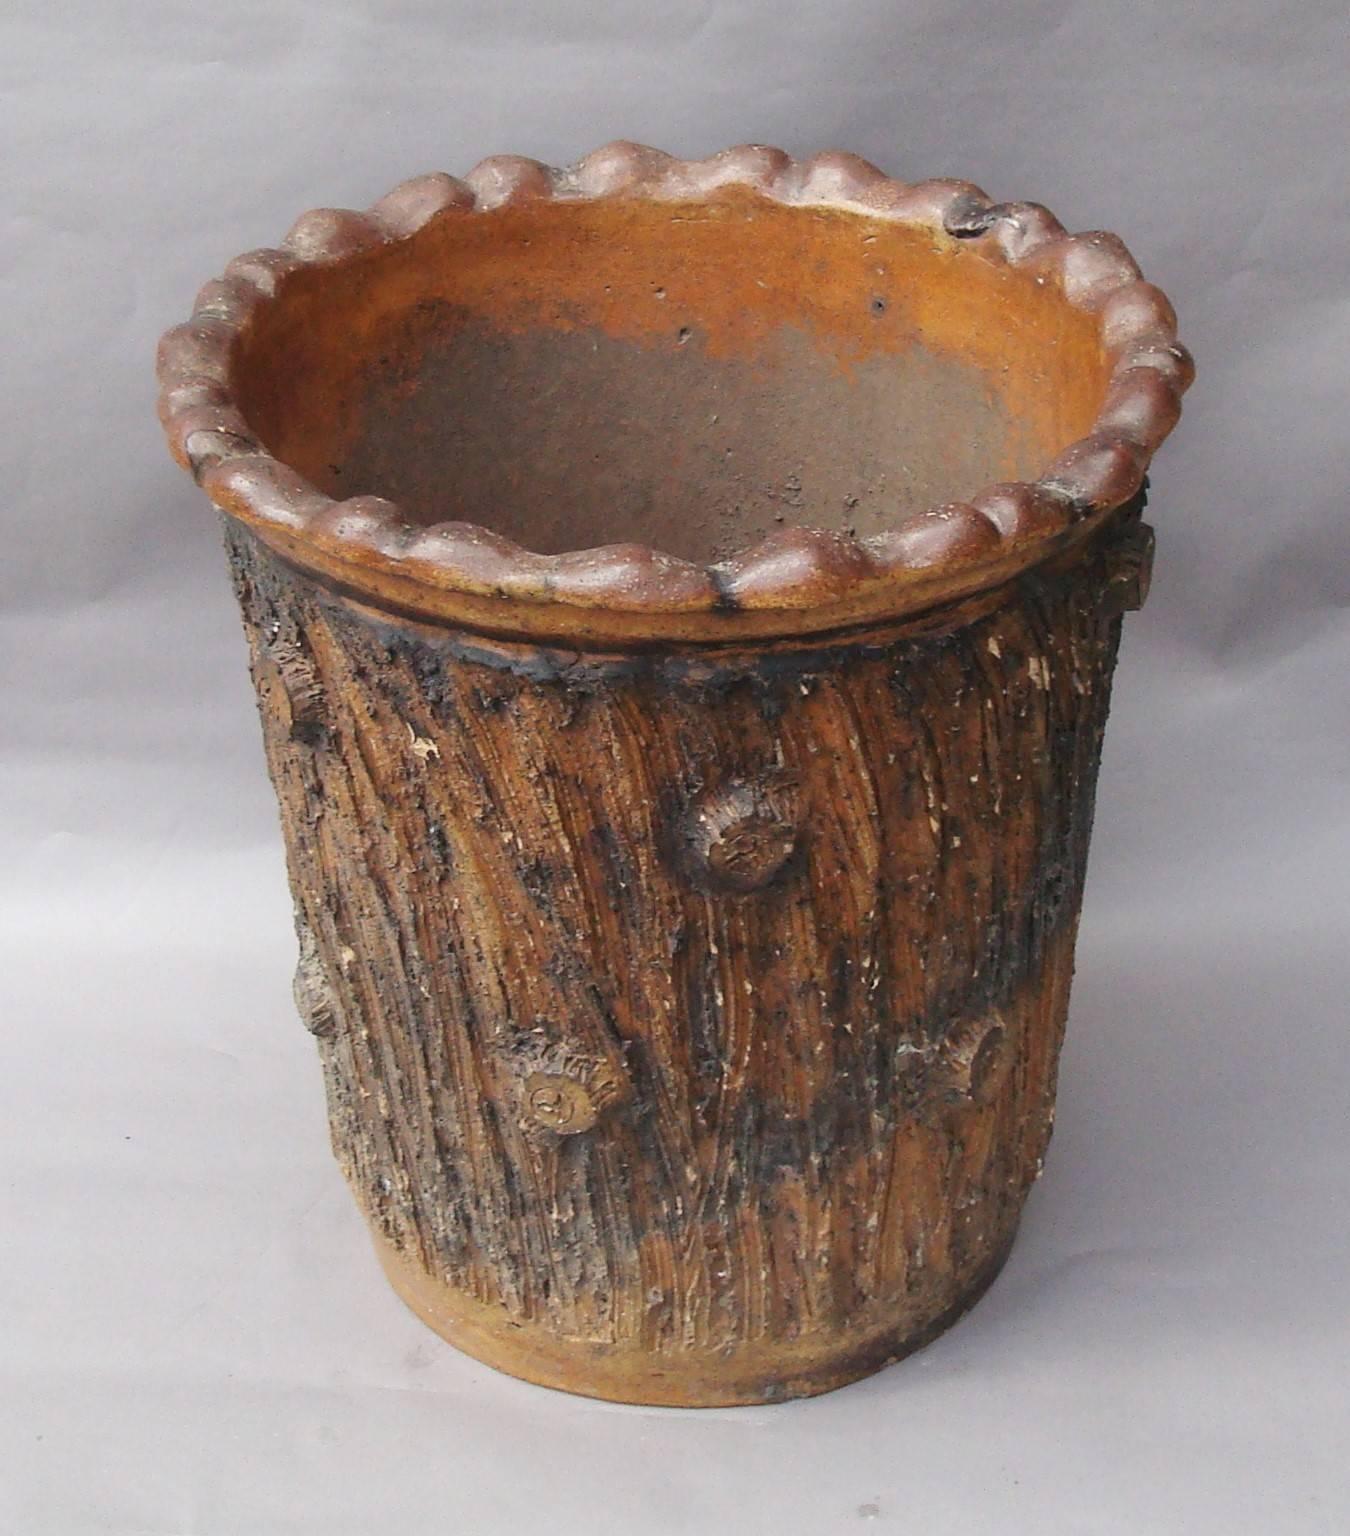 A large 19th century bark pattern jardinière or log bin in glazed pottery; the top with a wavy moulded edge above the slightly tapering main body with realistic bark and stump effect,
English, circa 1870.
Excellent condition, very minor